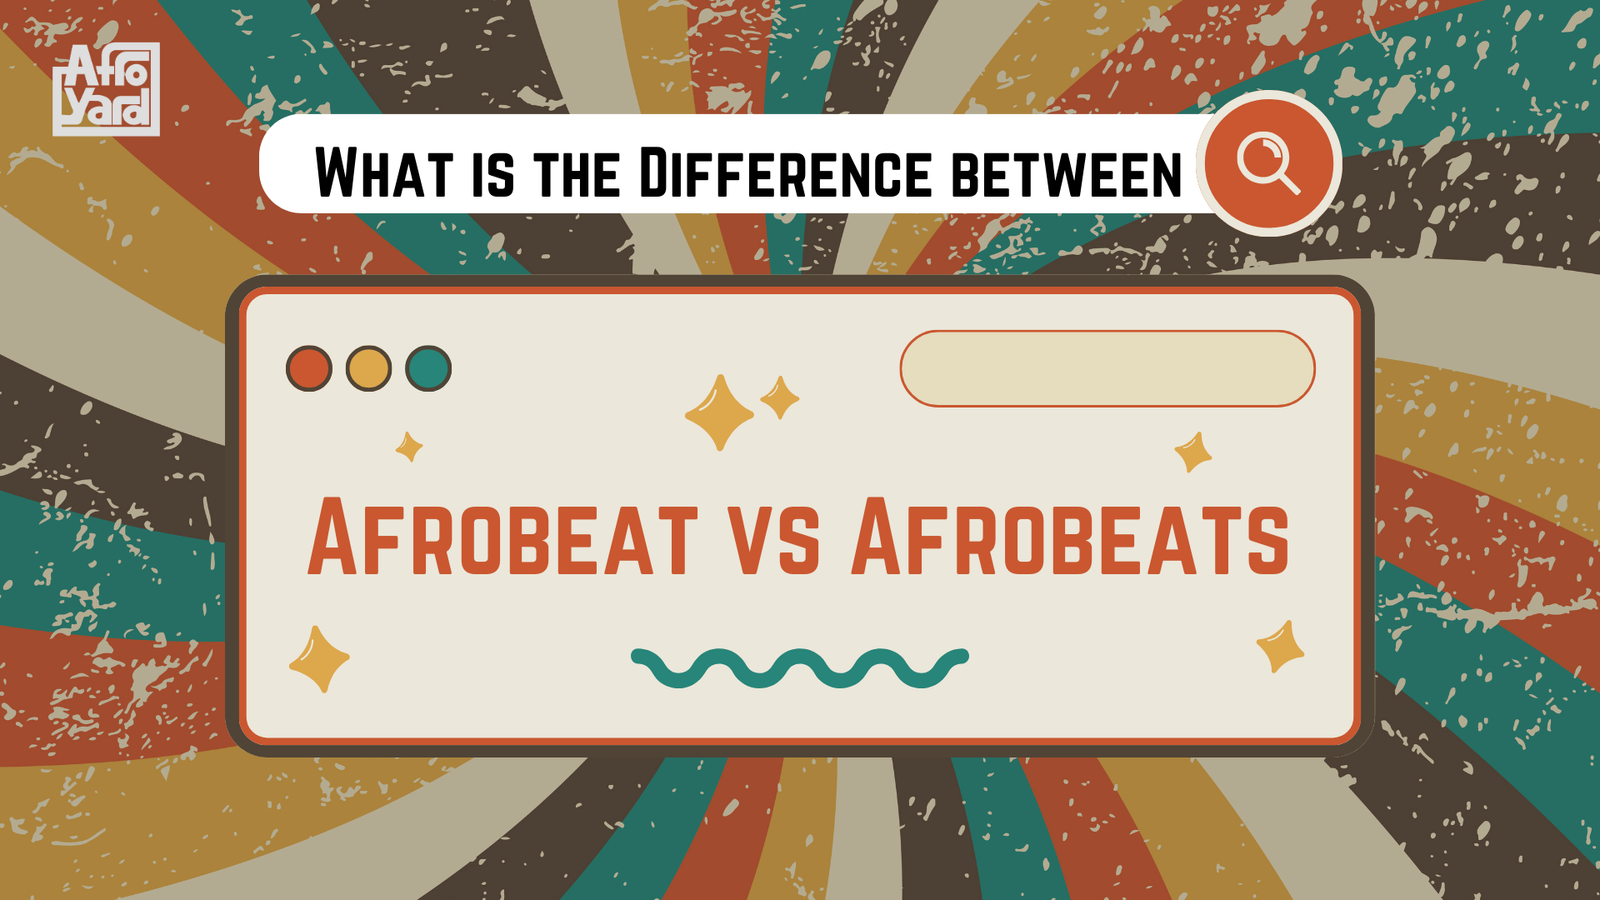 What is the difference between Afrobeat and Afrobeats?